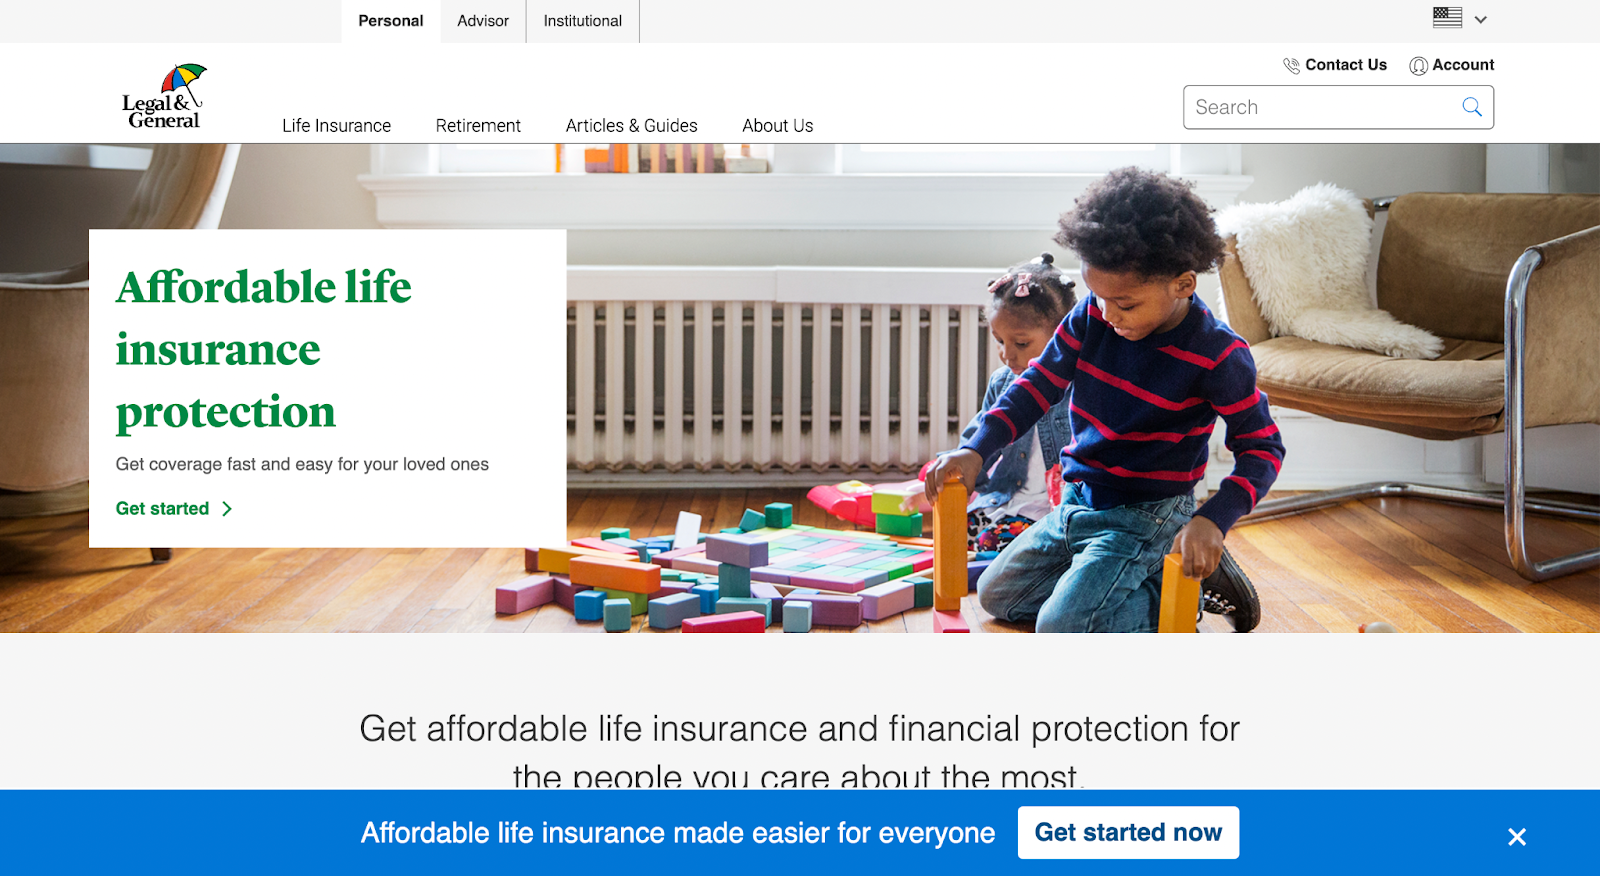 Insurance website design, example from Legal & General Insurance